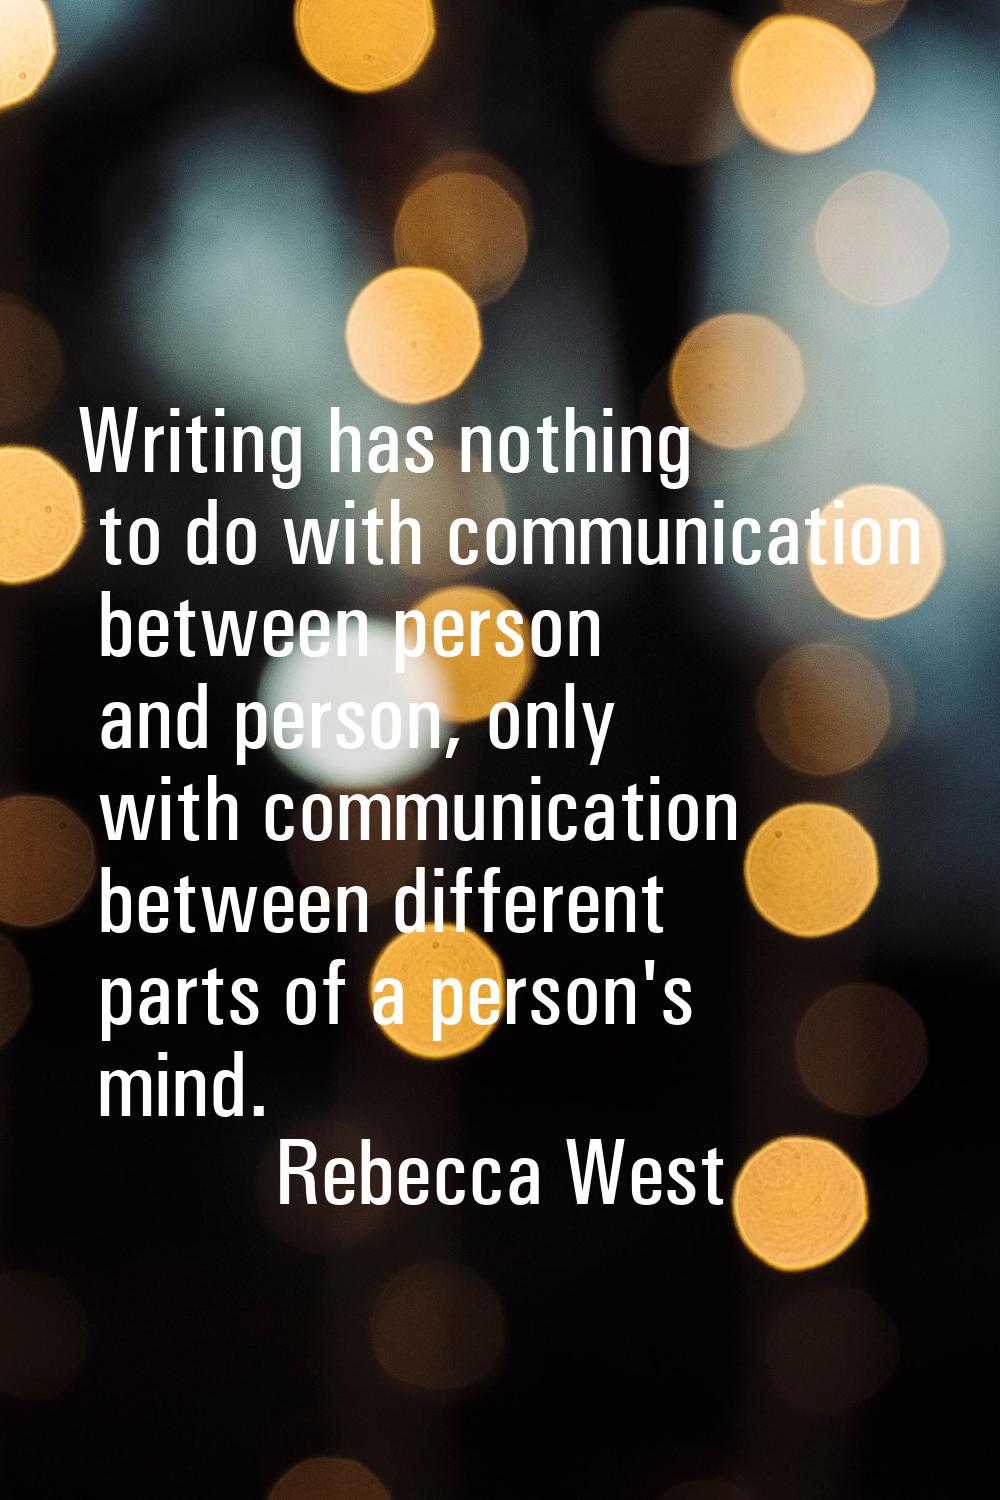 Writing has nothing to do with communication between person and person, only with communication bet